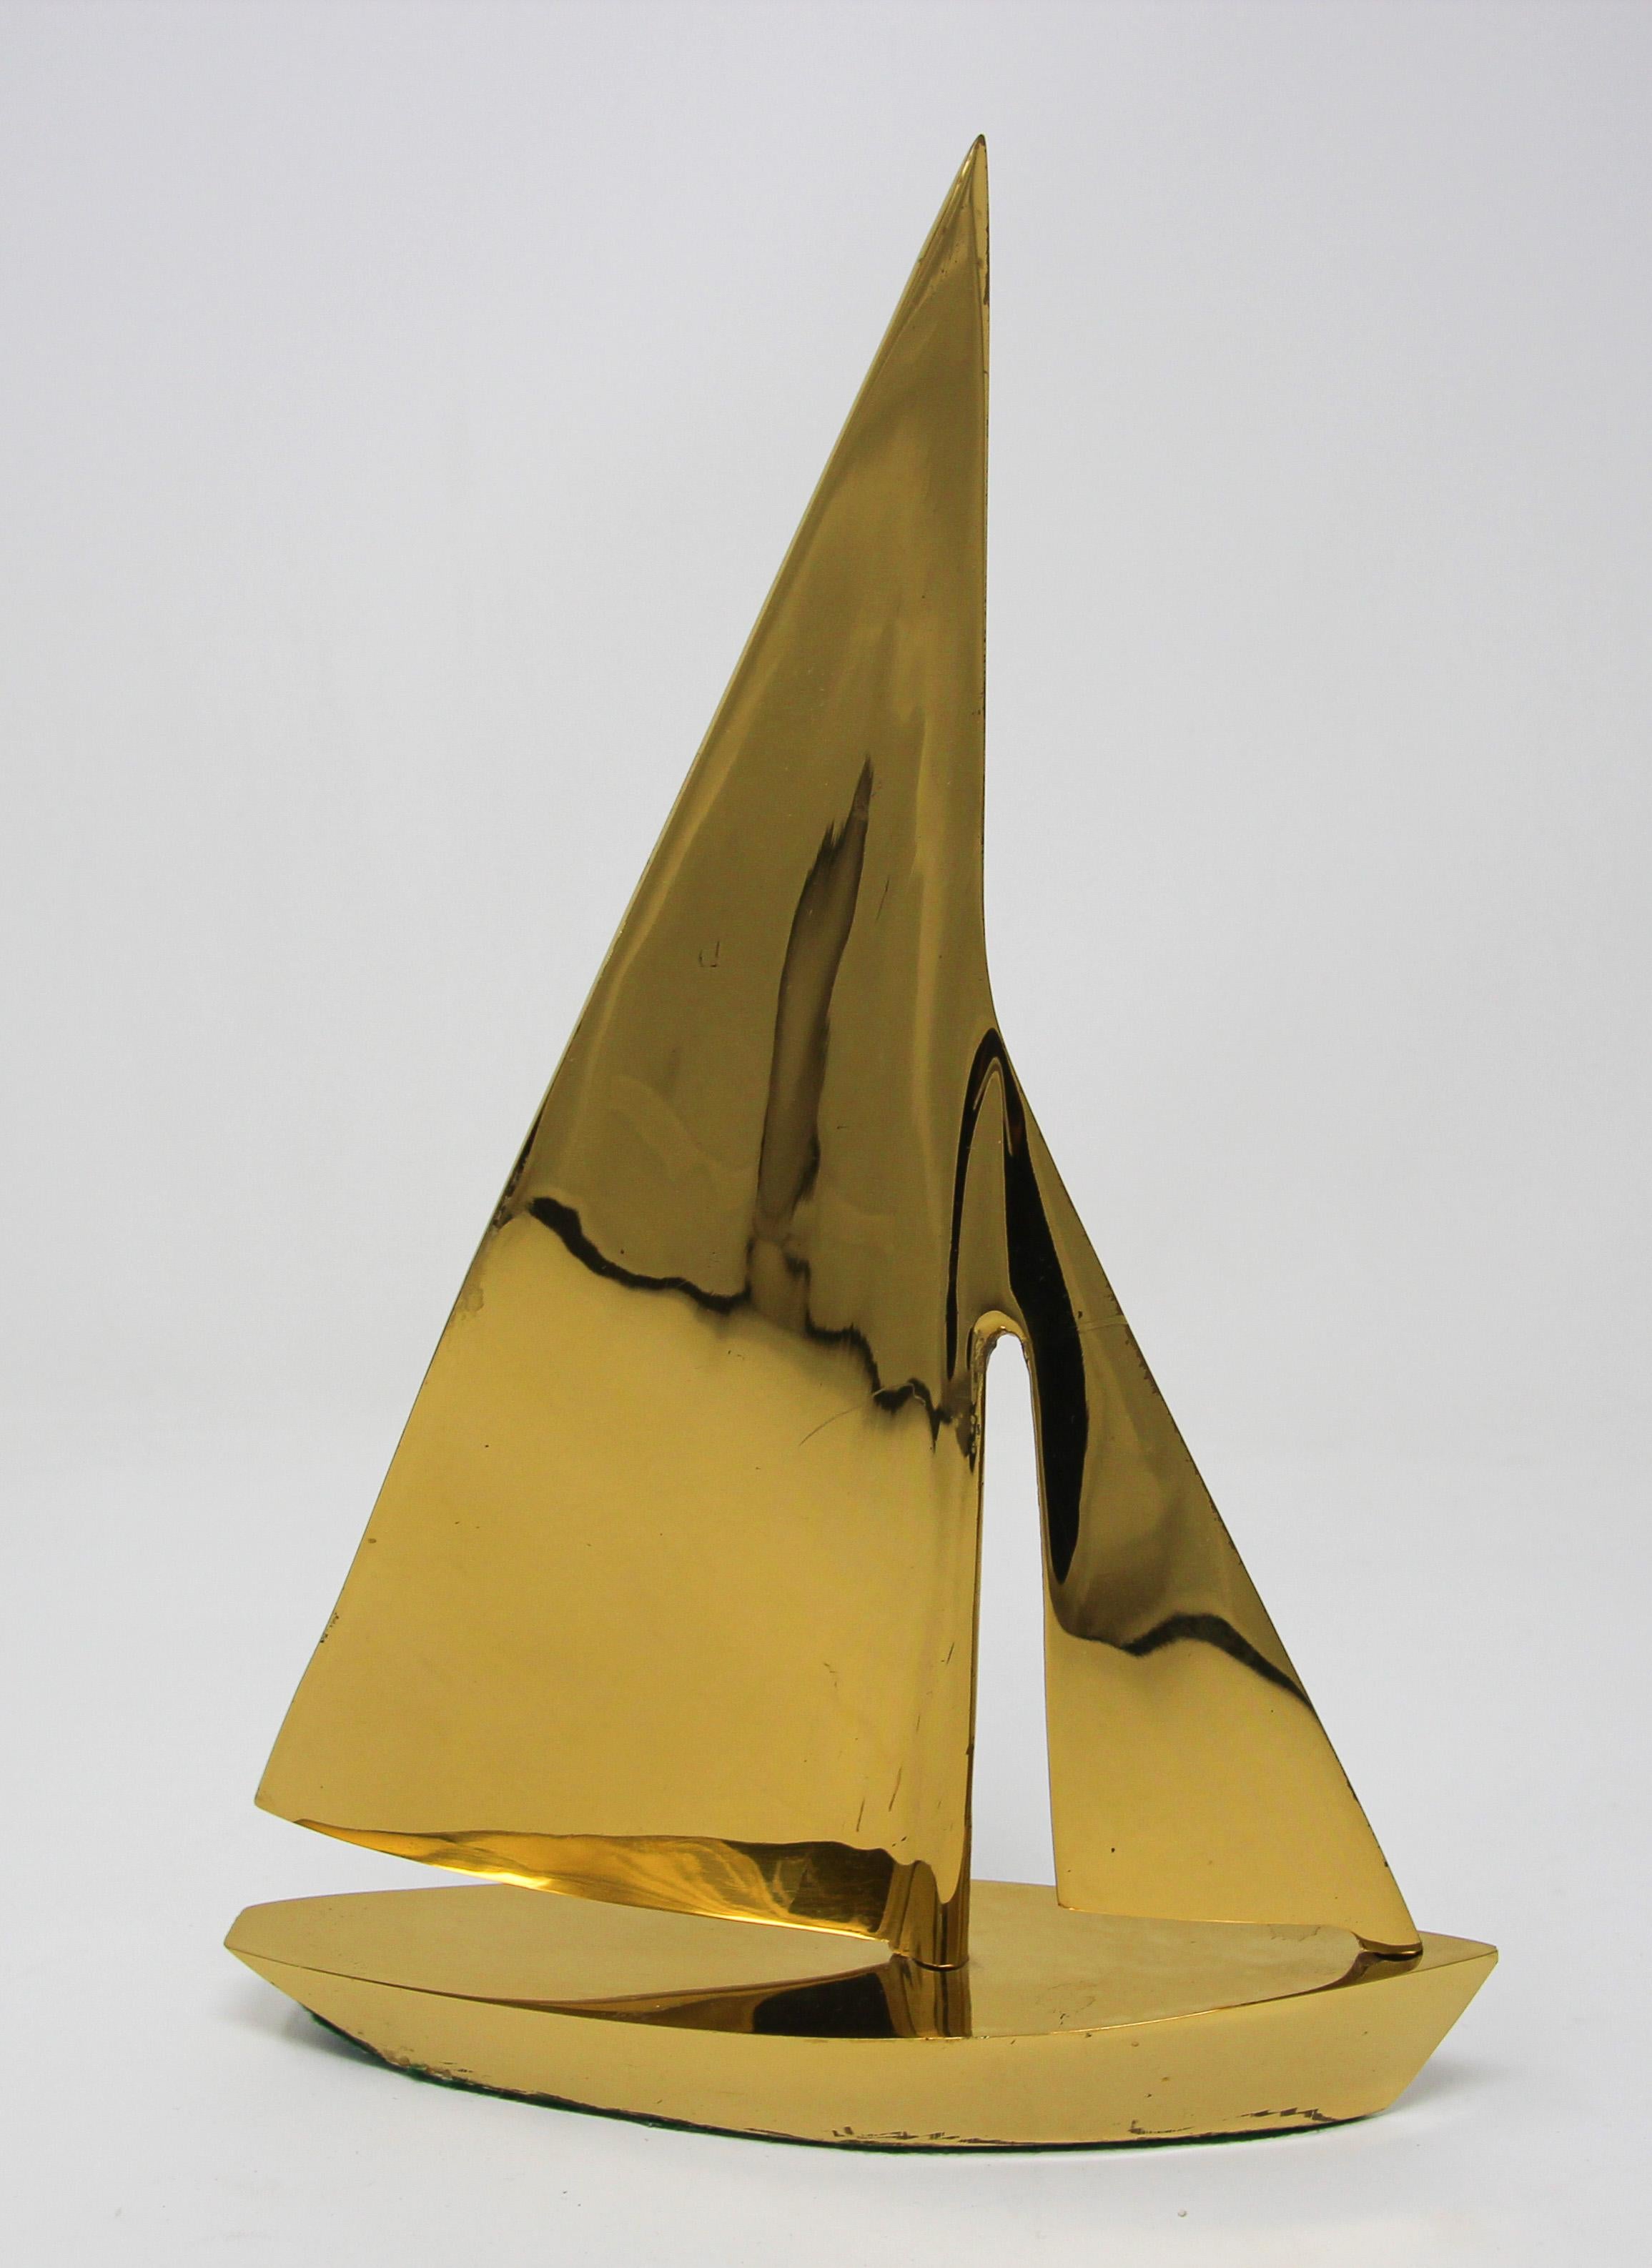 Large Modernist small polished brass sailboat paperweight.
A sturdy and sleek midcentury brass sailboat.
Vintage beautiful midcentury figural solid brass sailboat, figurine would be perfect for adding a touch of nautical flair to a coffee table,